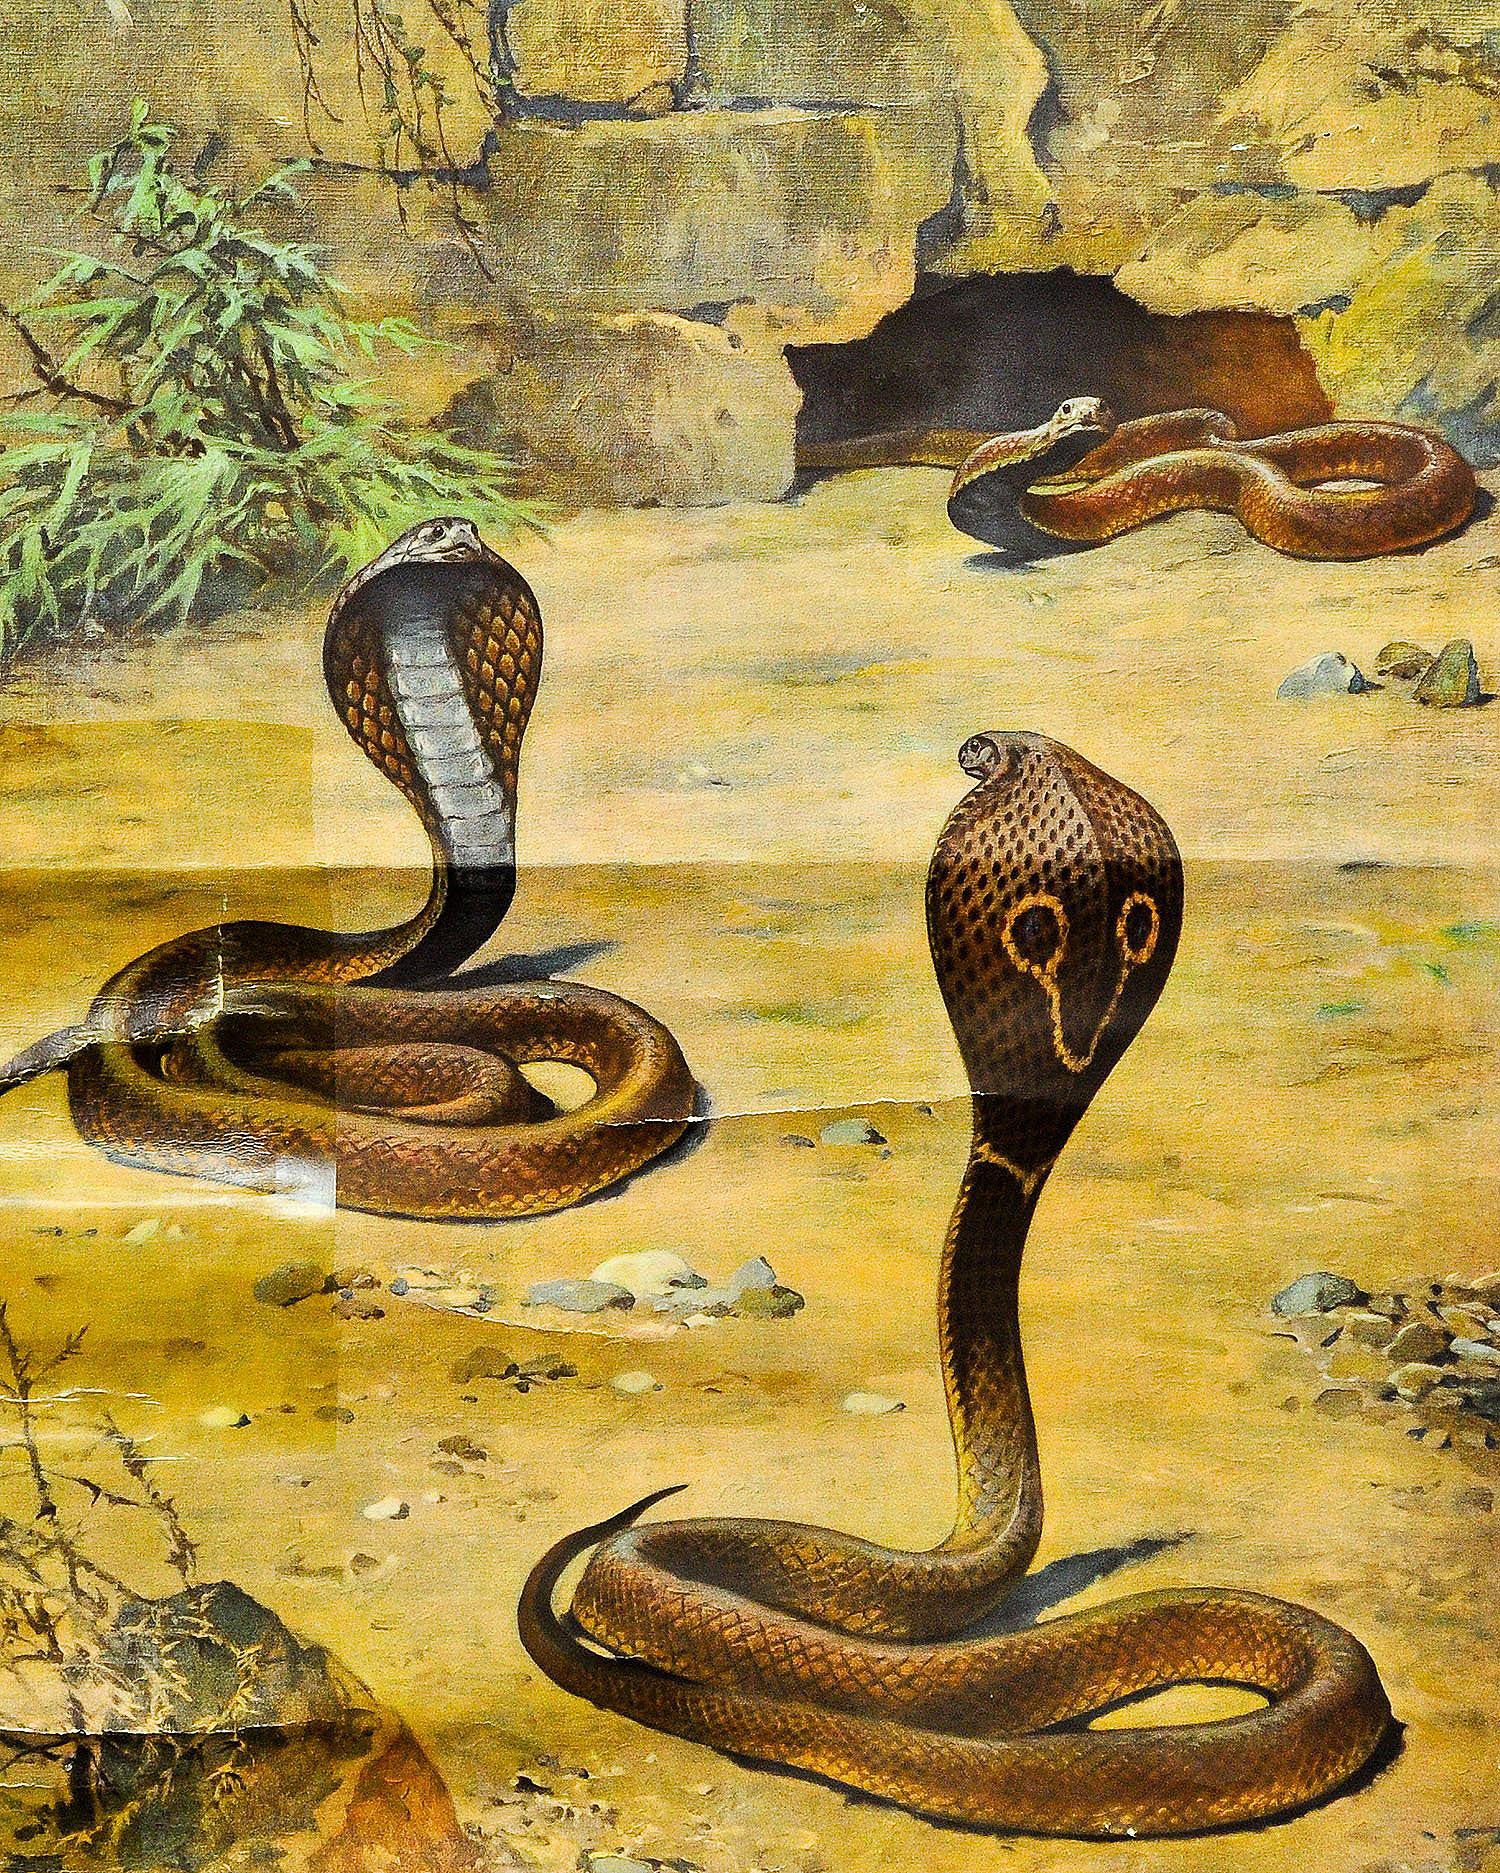 An old rollable wall chart depicting a fighting scenery of two cobras and a third snake arriving in the background. Colorful print on paper reinforced with canvas. Published around the 1920s. The chart has been repaired on the front side and